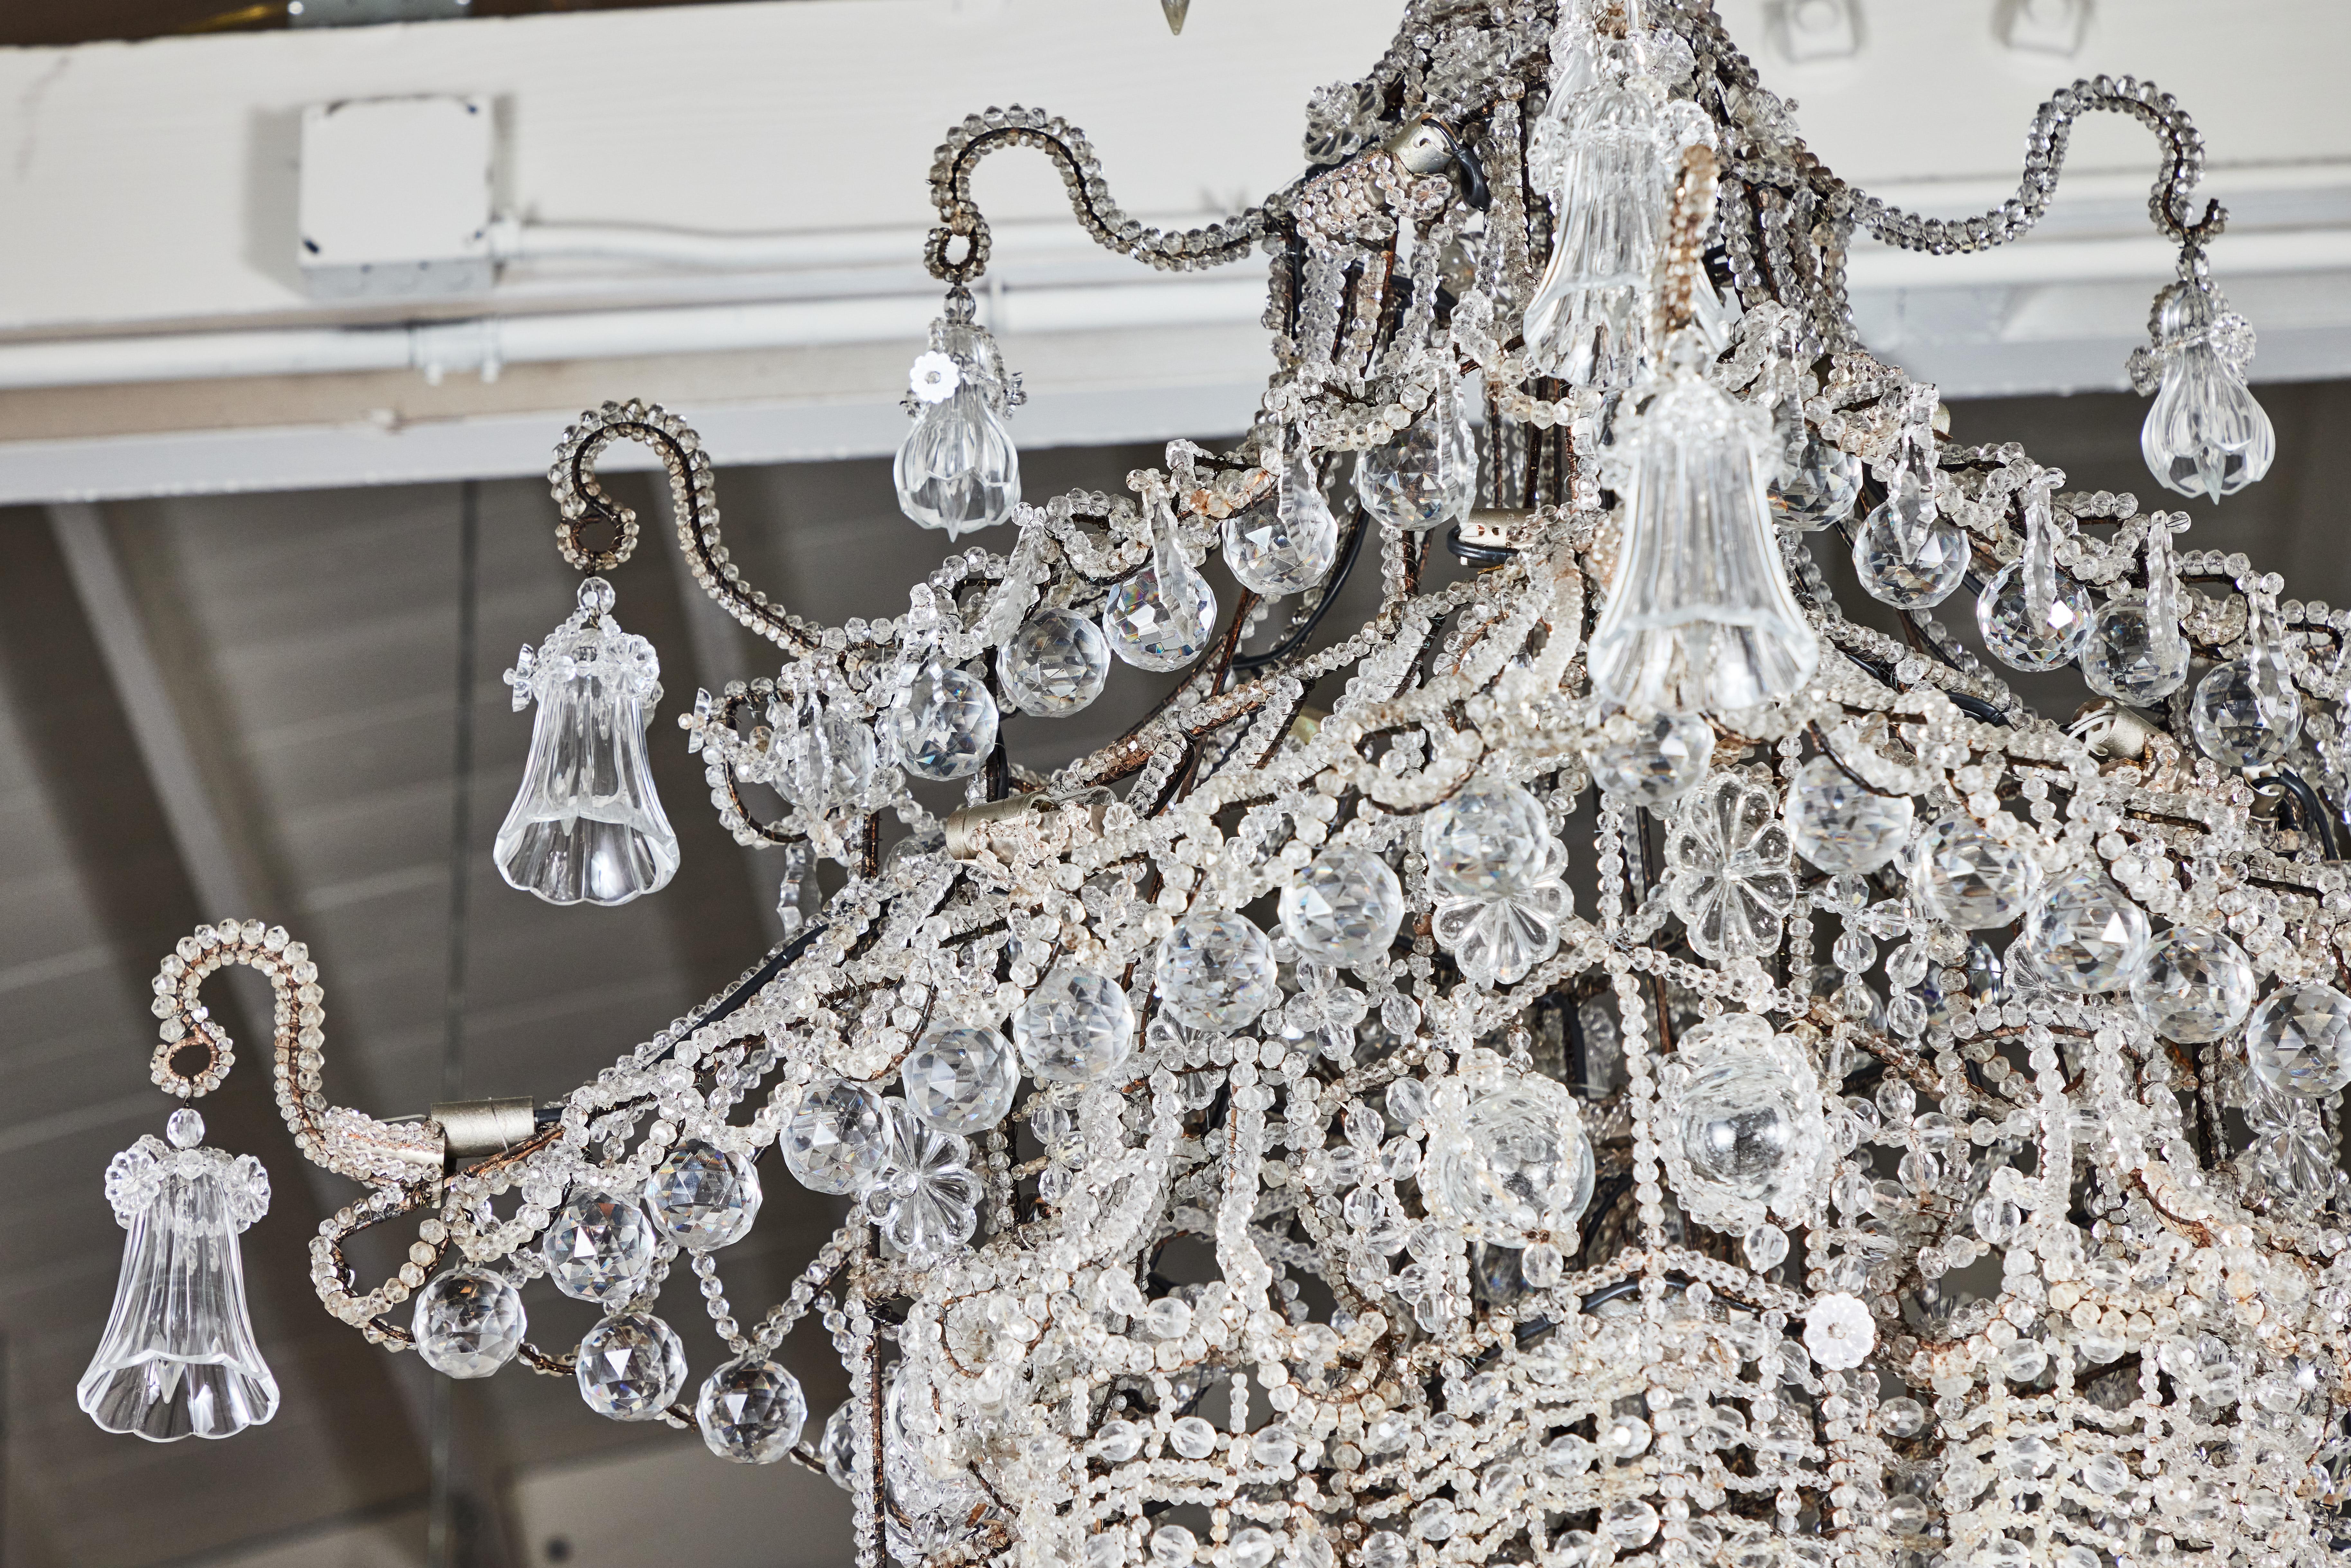 Remarkable, grand, crystal and hand-beaded, Sicilian pagoda chandelier featuring protruding turrets and a tiered upper level embellished with cascading, floral form drops. From the famous, Crespi-Hicks Estate in Dallas, Texas which was redesigned in